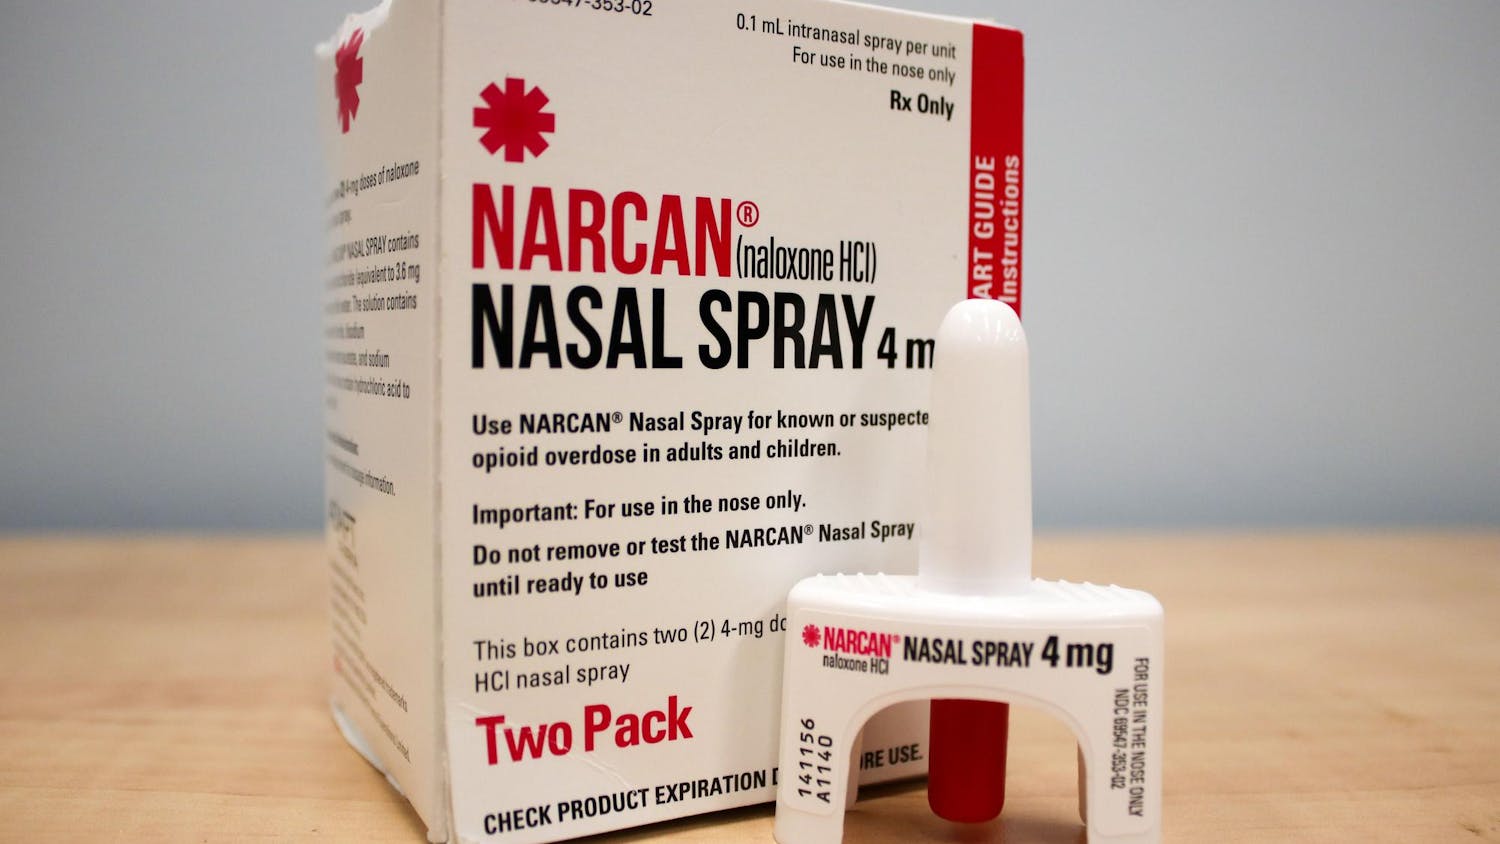 A photo illustration of a box of Narcan and a nasal spray container. Narcan is a brand name for the medication Naloxone, which is used to reverse opioid overdoses.